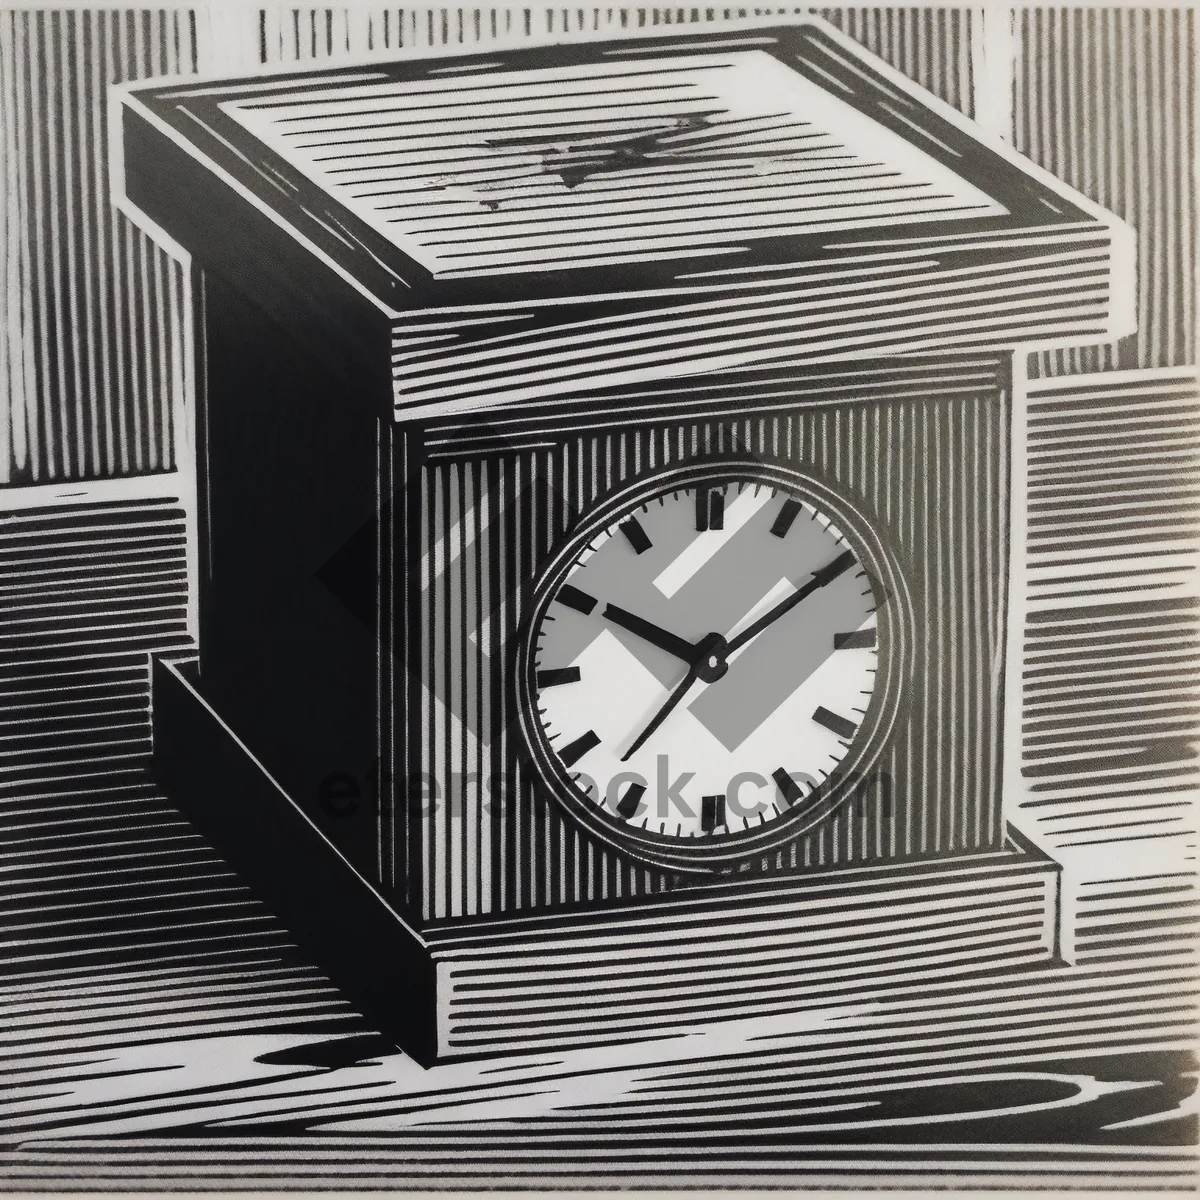 Picture of Vintage Analog Clock Showing Time